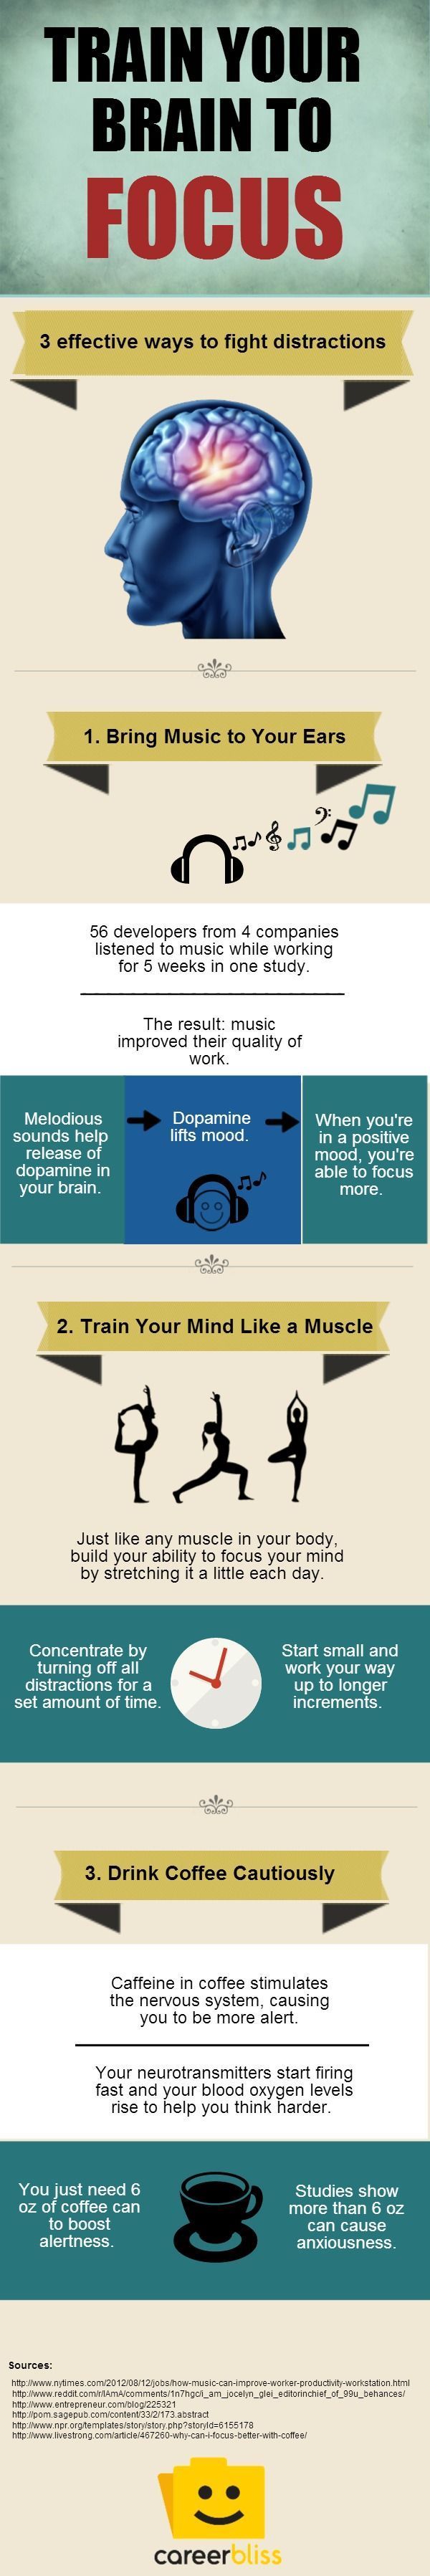 3 Ways to Train Your Brain to Focus [INFOGRAPHIC]